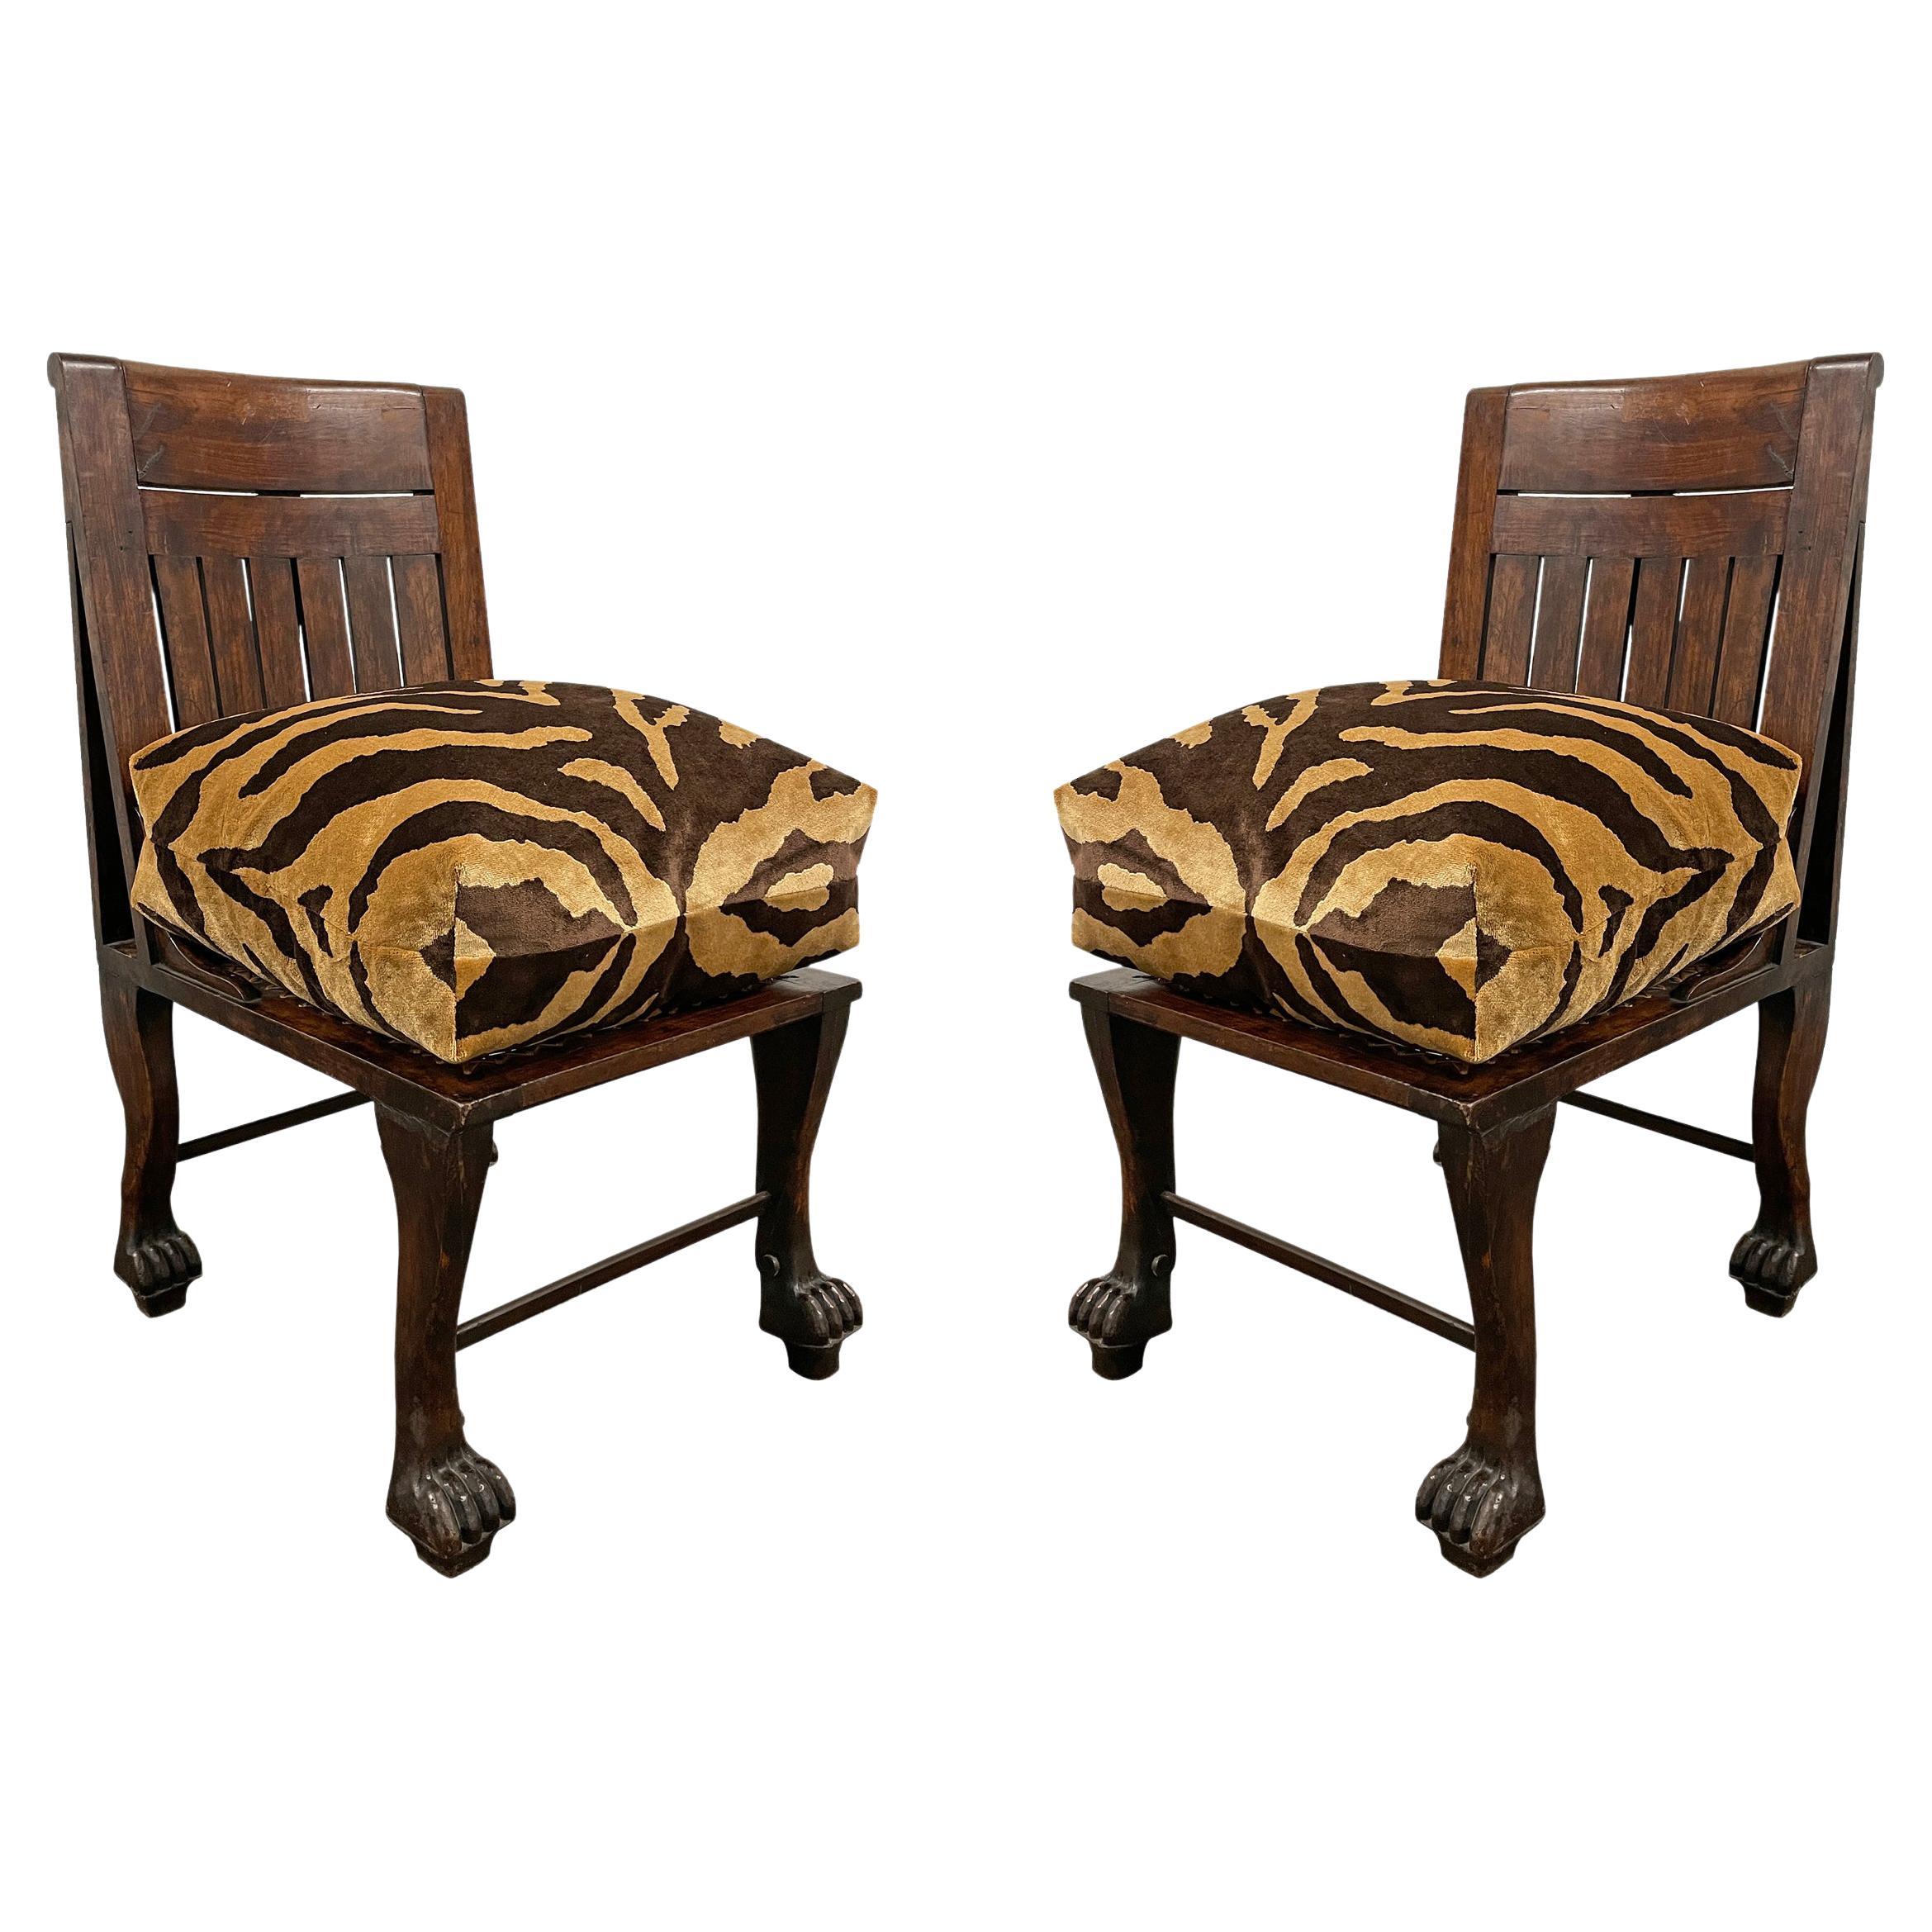 Pair of Early 20th Century English Egyptian Revival Chairs For Sale